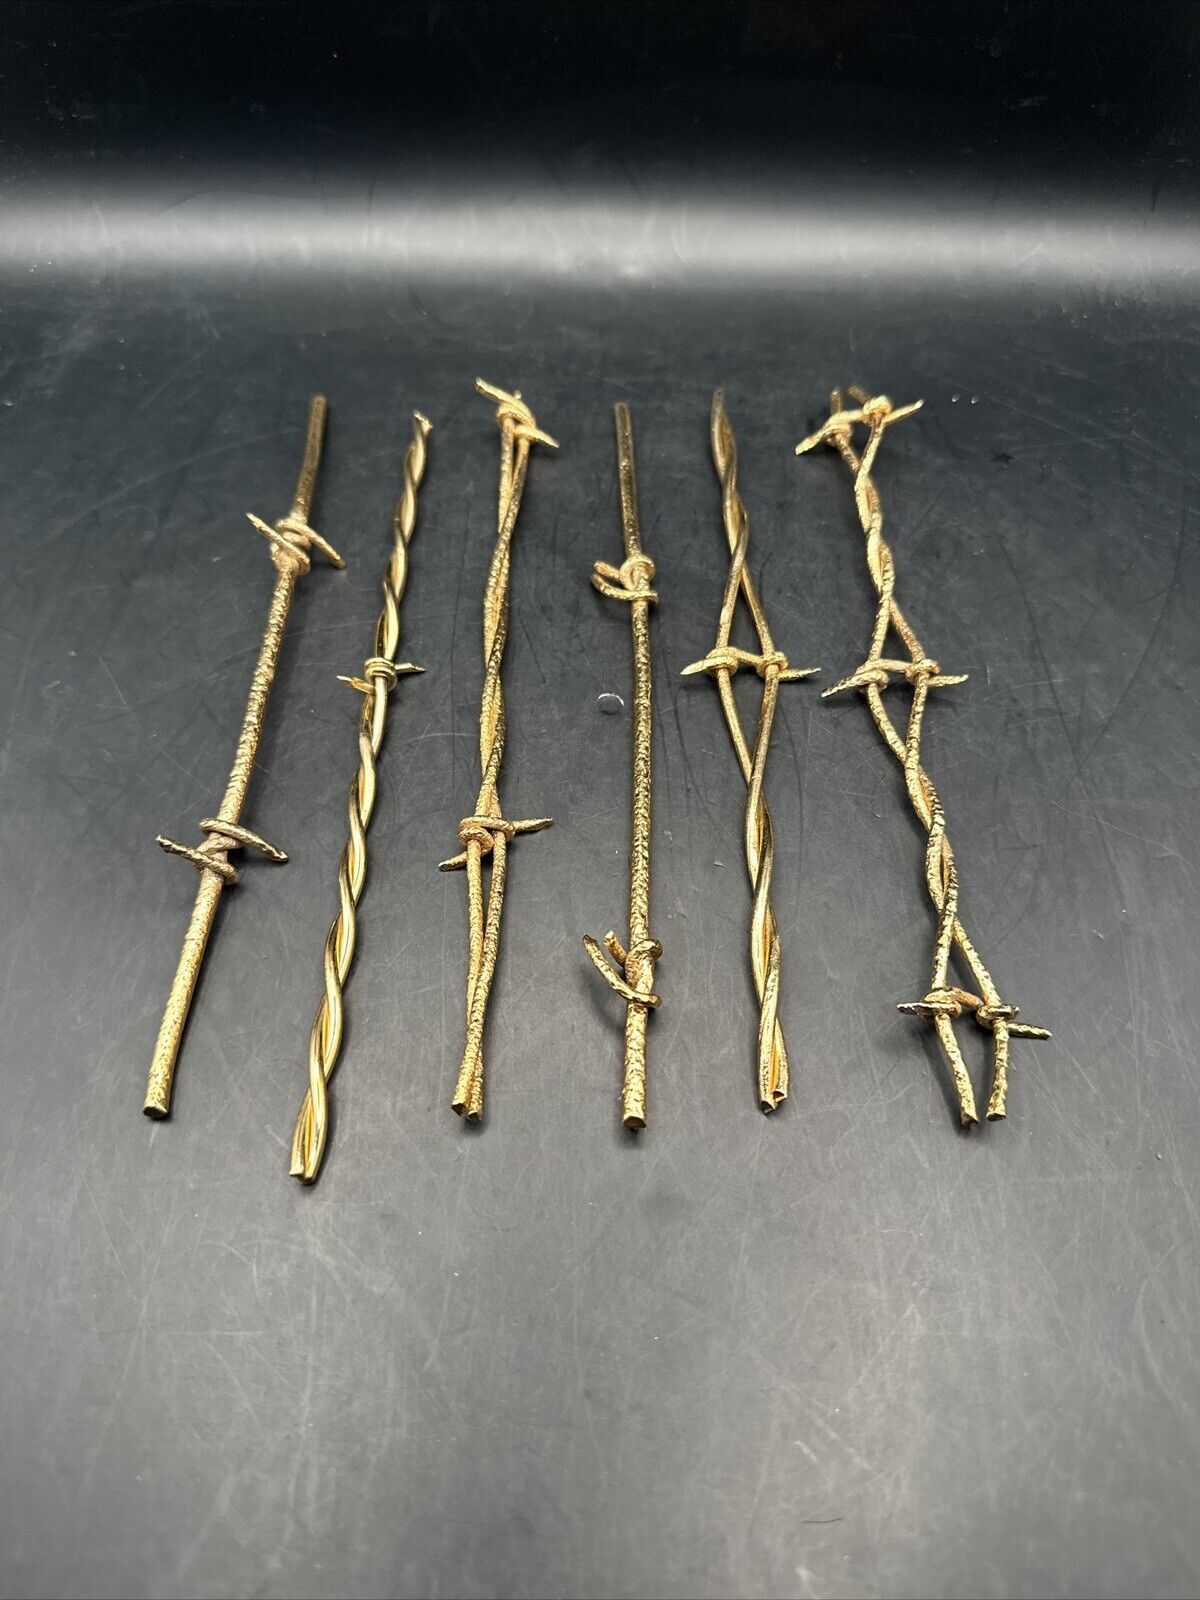 Vintage Neiman Marcus Texas 6 Barbed Wire Swizzle Sticks Plated Gold Barbed Wire